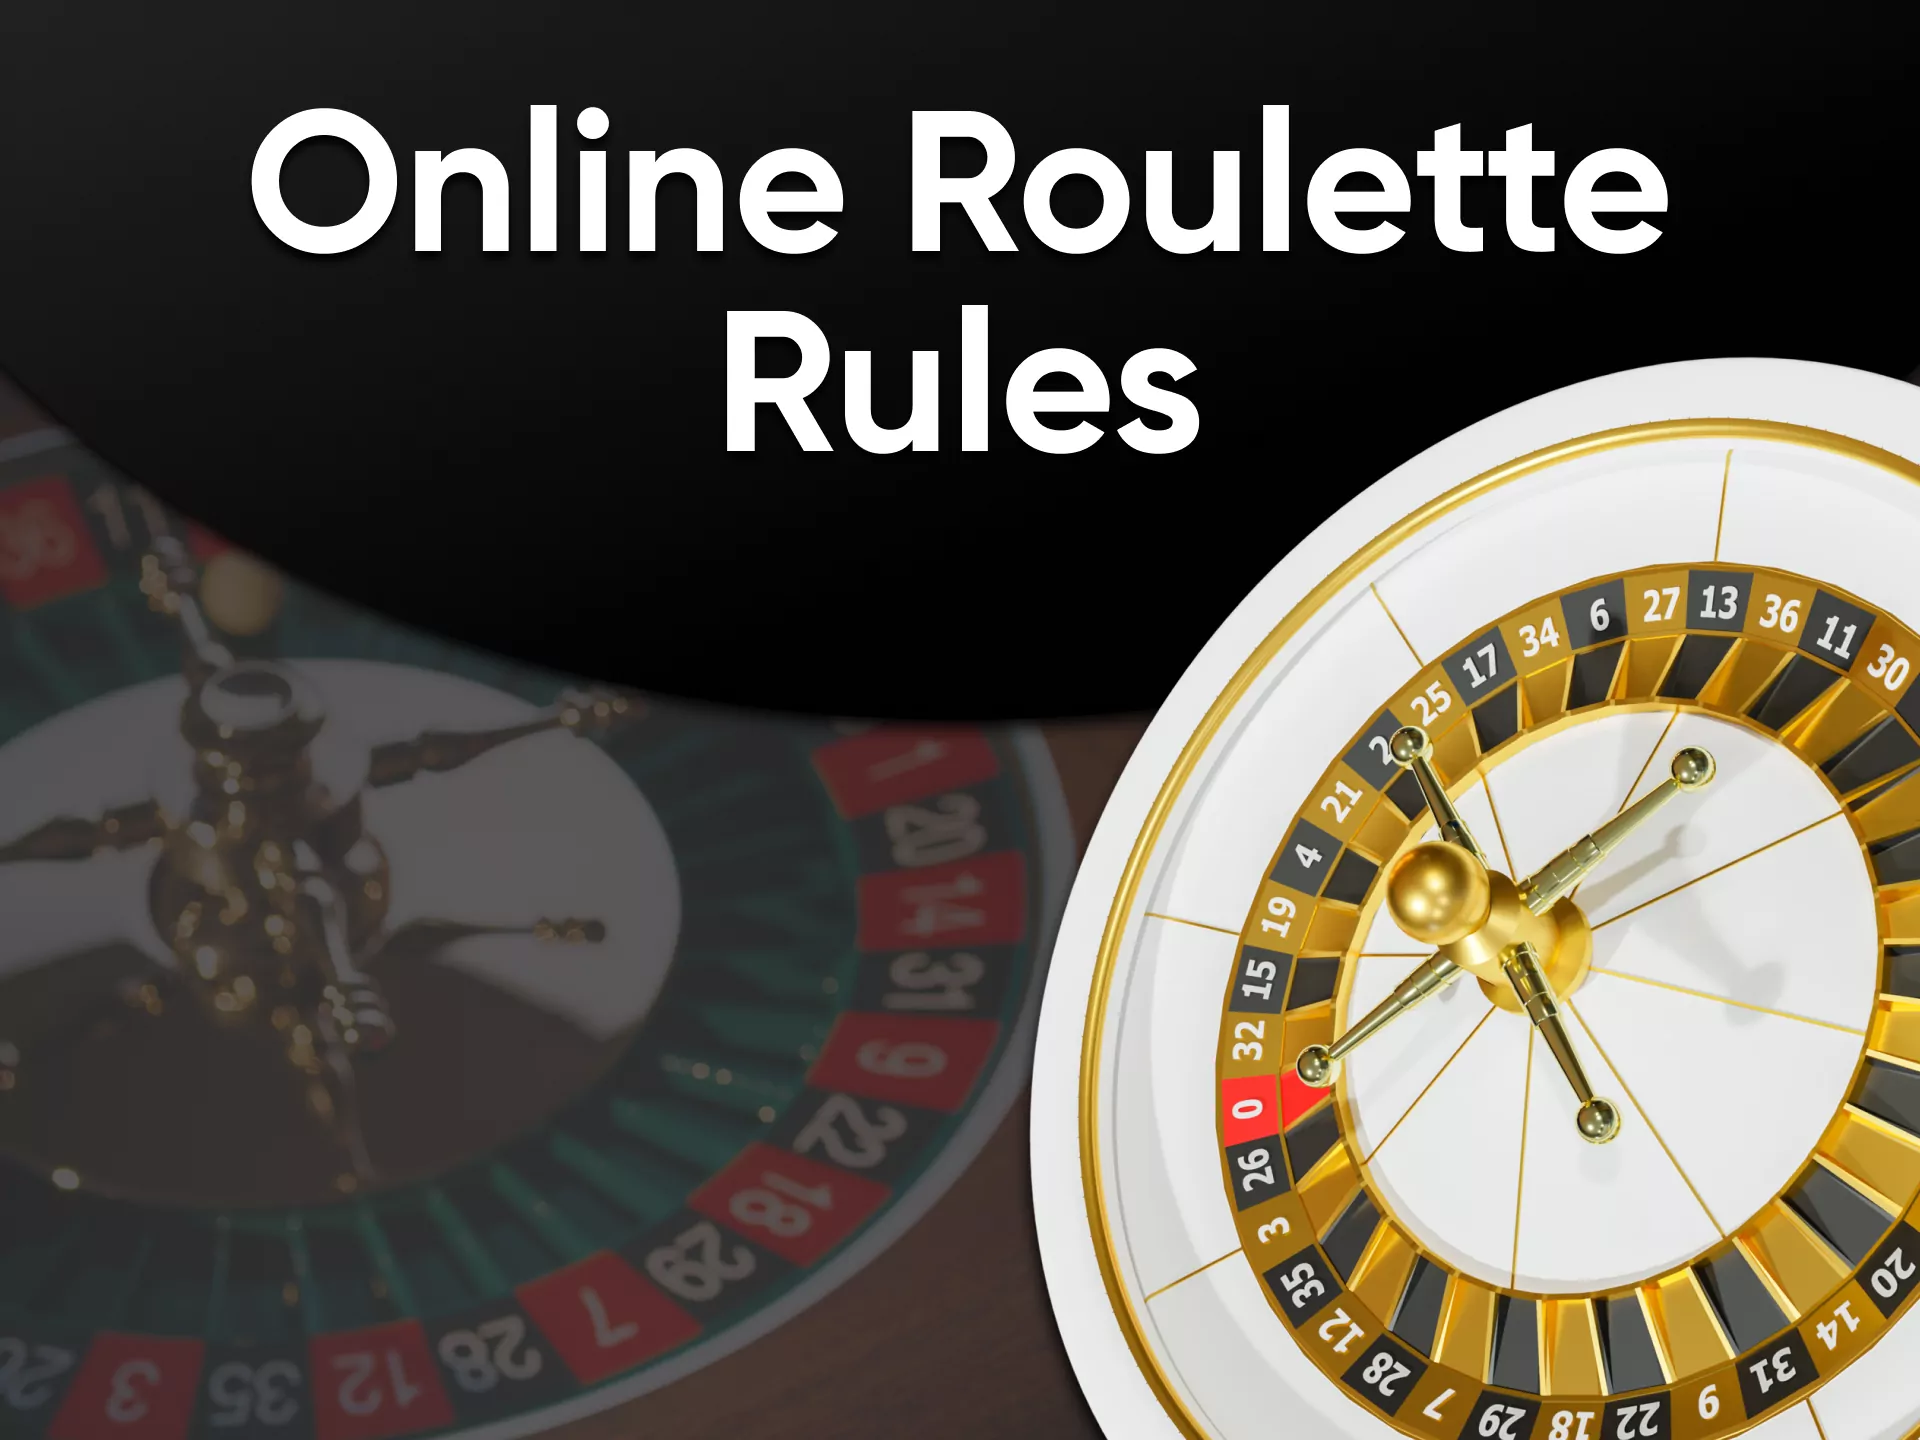 Learn the rules for online roulette.